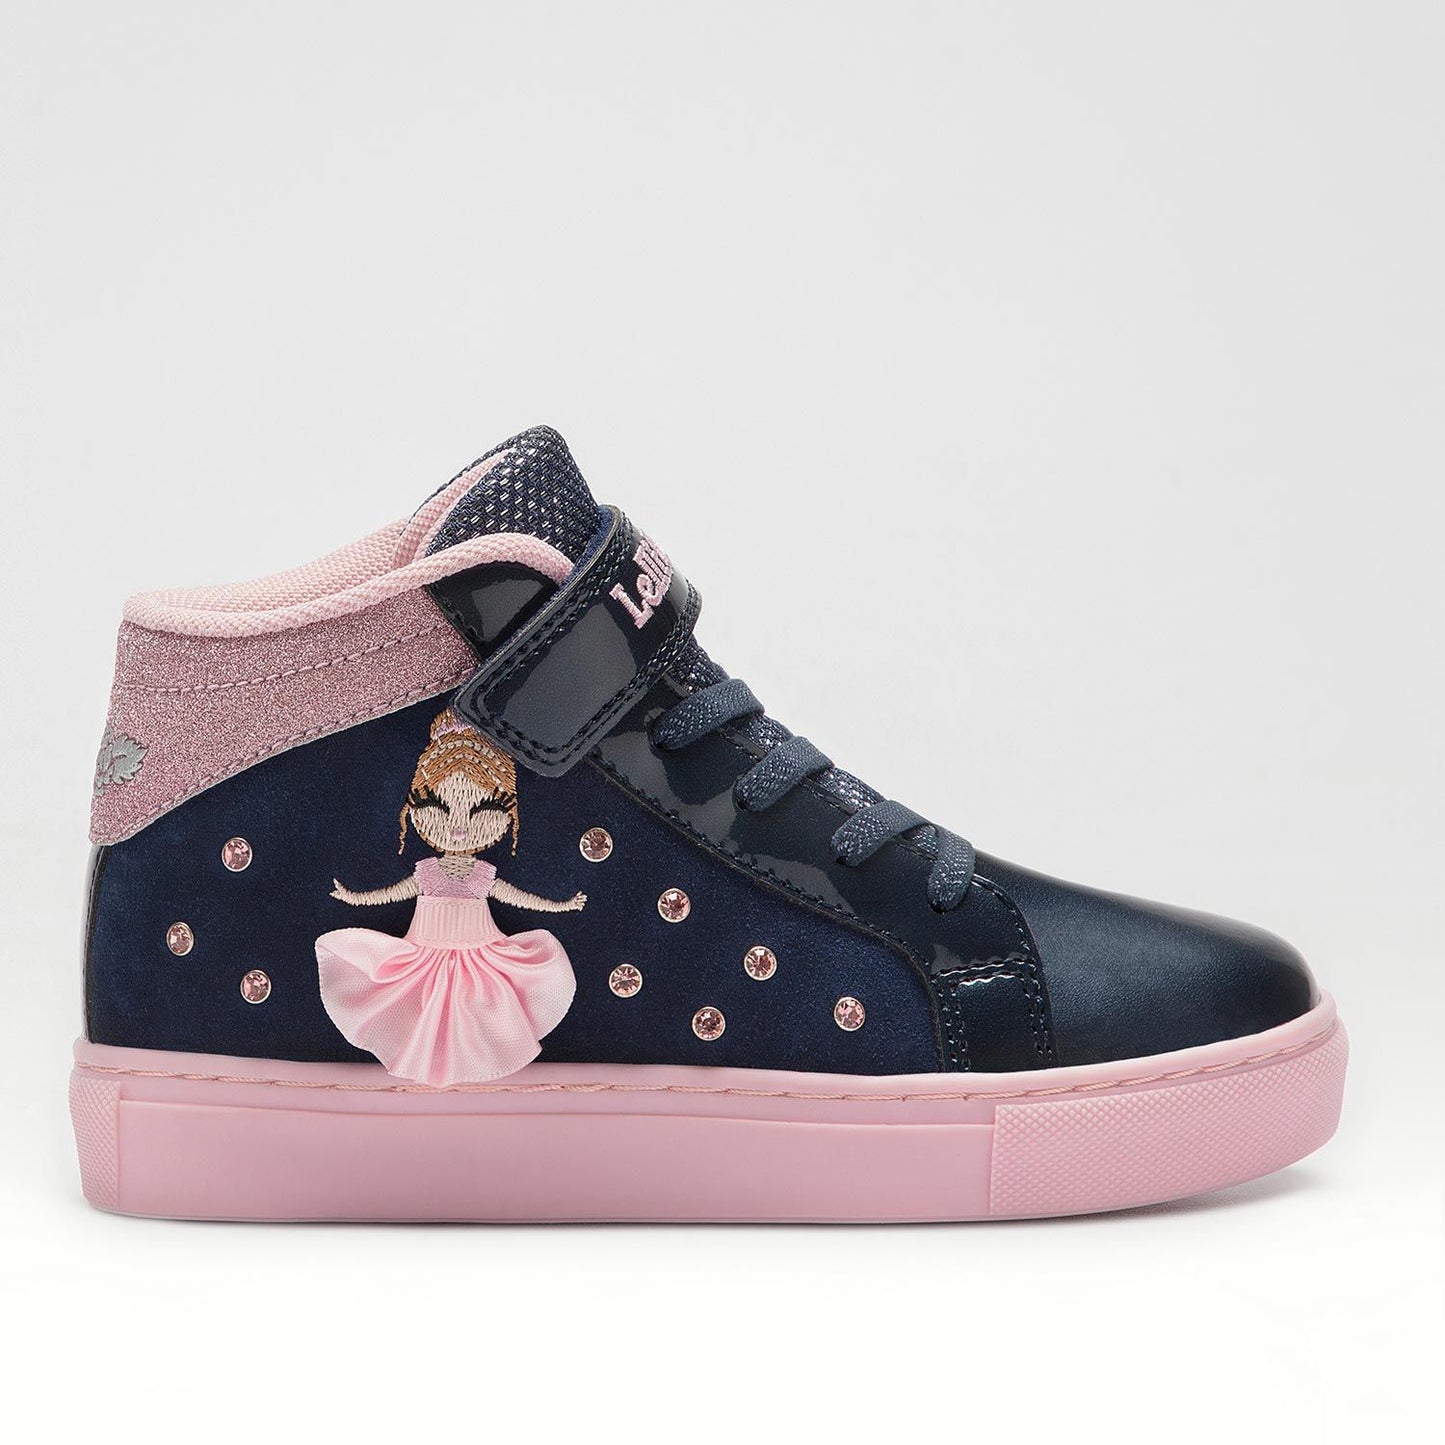 A girls hi top trainer by Lelli Kelly, style Mille Stelle, in navy and pink suede/patent with faux lace and velcro fastening.  Right side view.